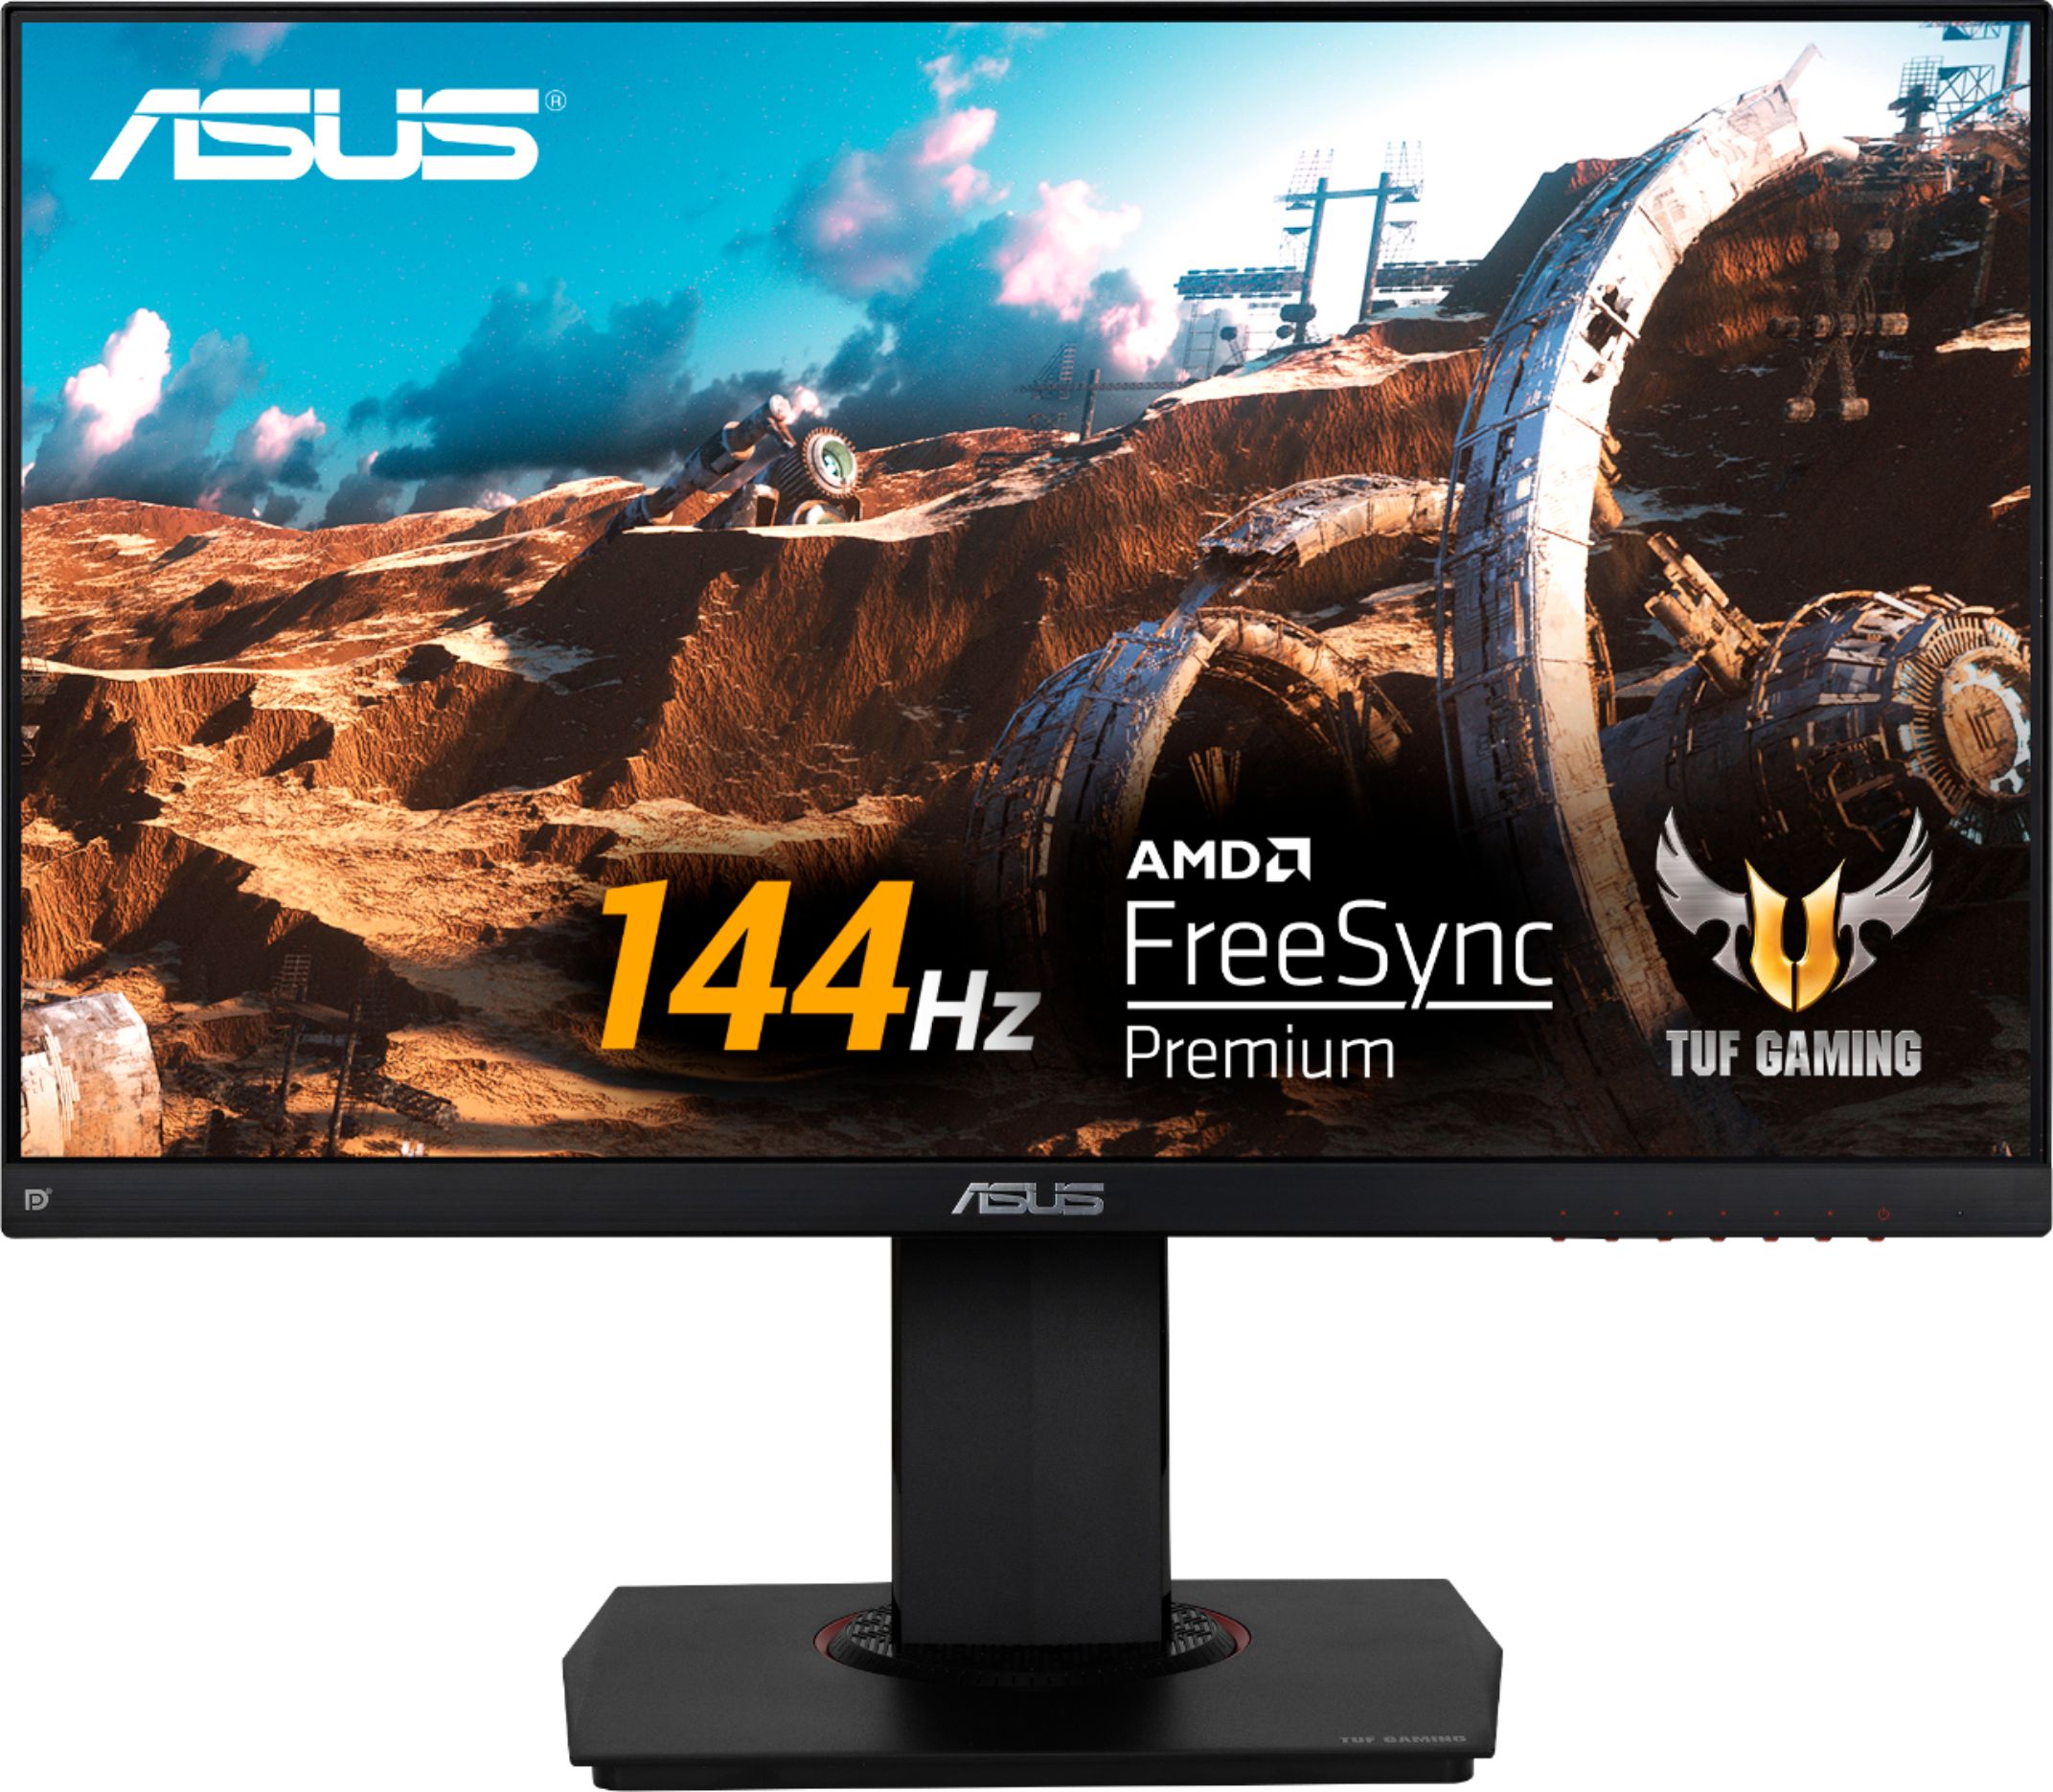 vonnis Herinnering Mis ASUS TUF 23.8” IPS FHD 144Hz 1ms FreeSync Gaming Monitor with Height  Adjustable (DisplayPort, HDMI) Black VG249Q - Best Buy